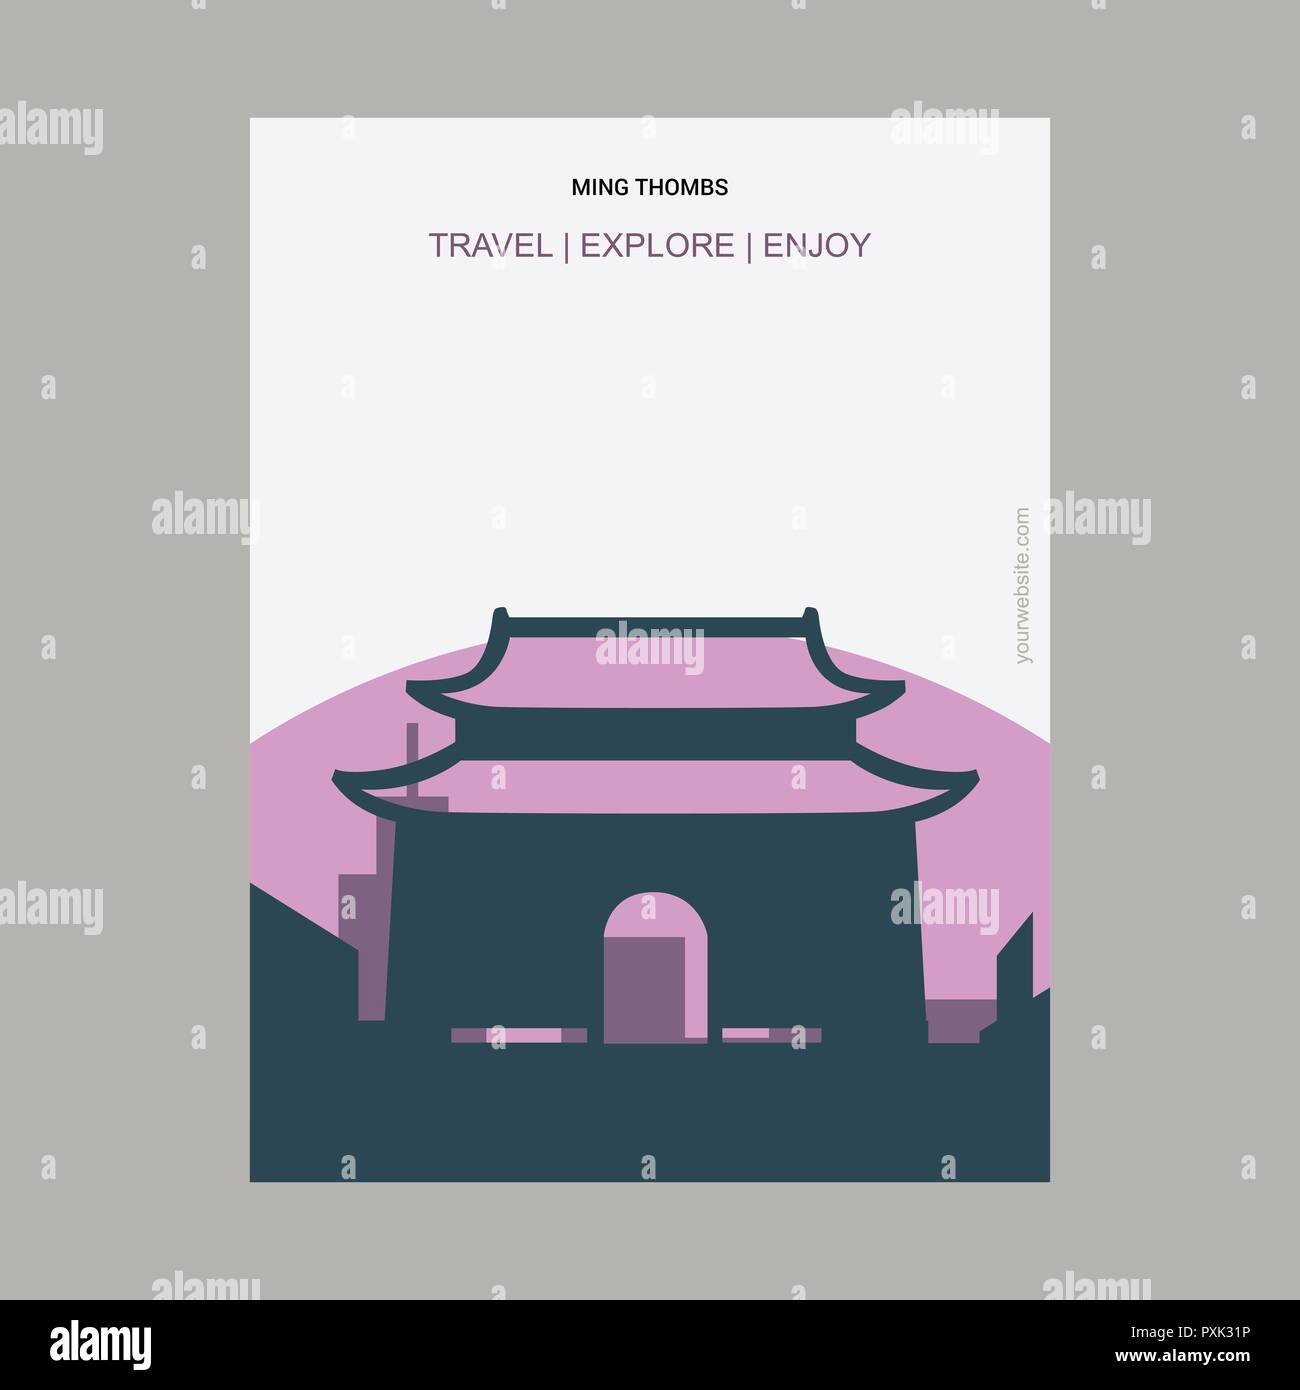 Ming Thombs, China Vintage Style Landmark Poster Template Stock Vector